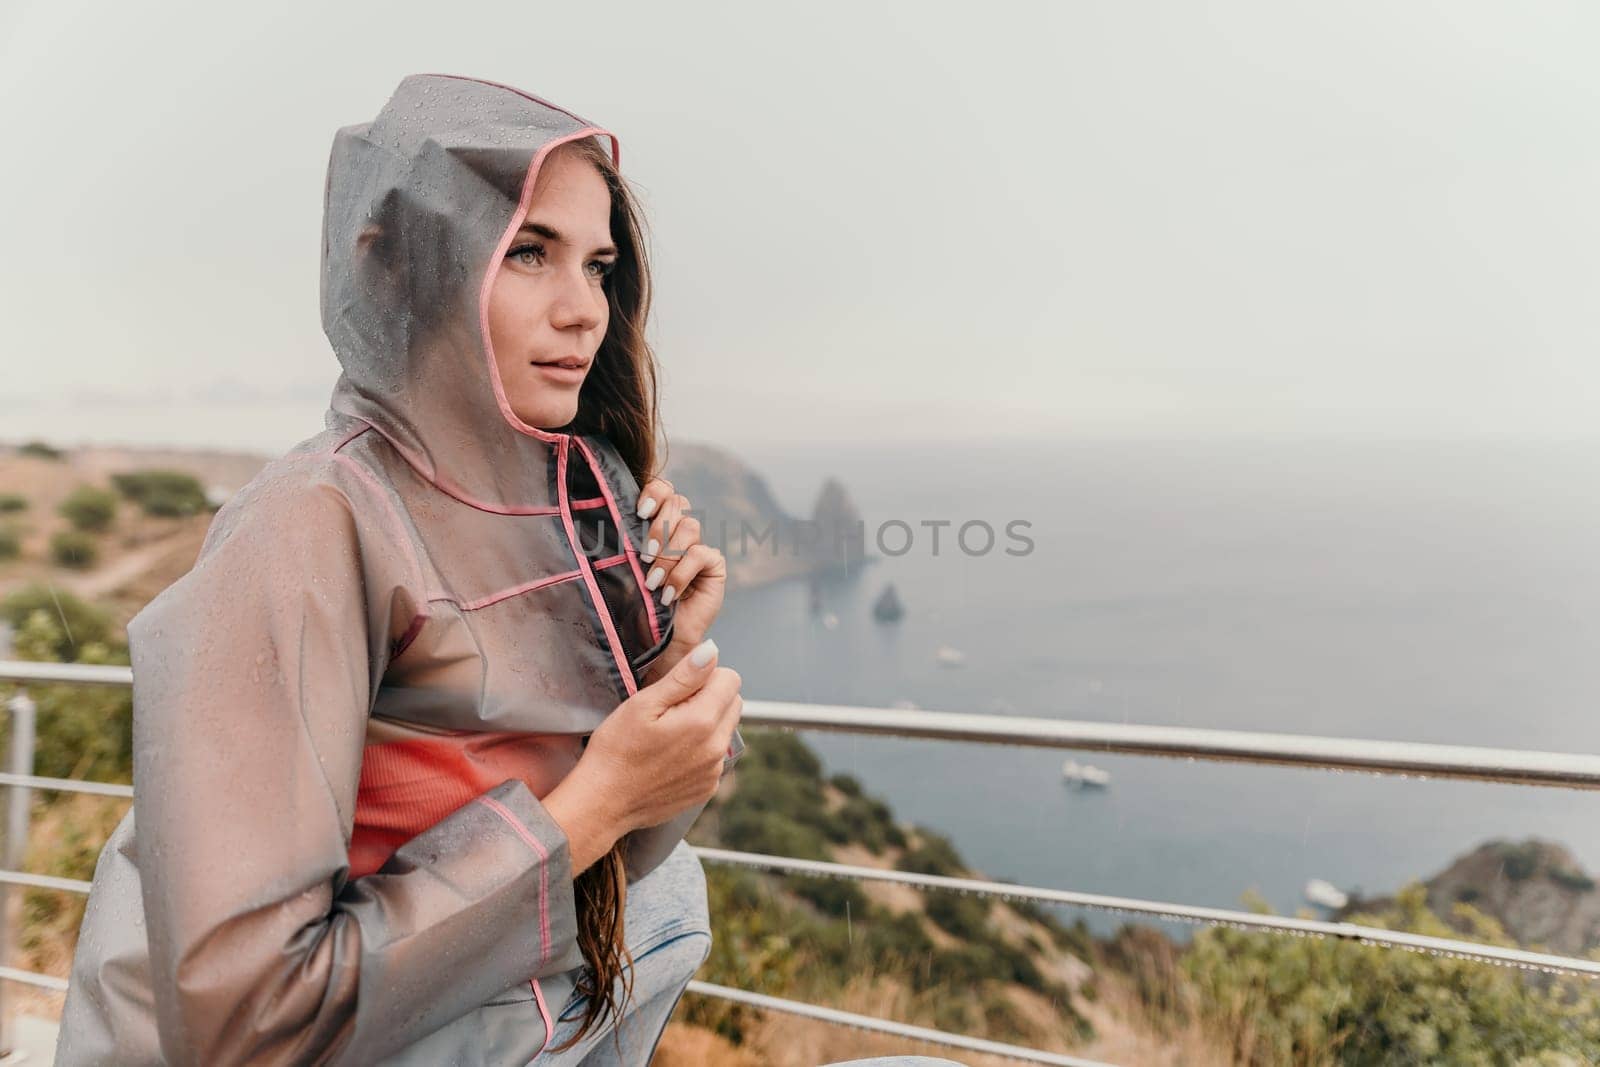 Woman rain park. Happy woman portrait wearing a raincoat with transparent umbrella outdoors on rainy day in park near sea. Girl on the nature on rainy overcast day